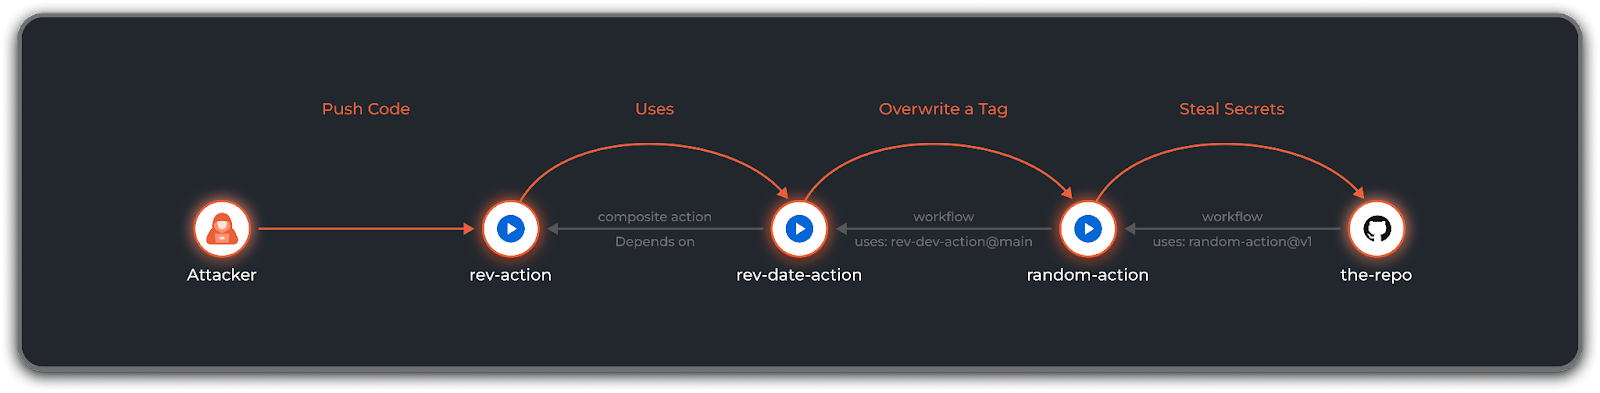 Illustration of the demo attack flow